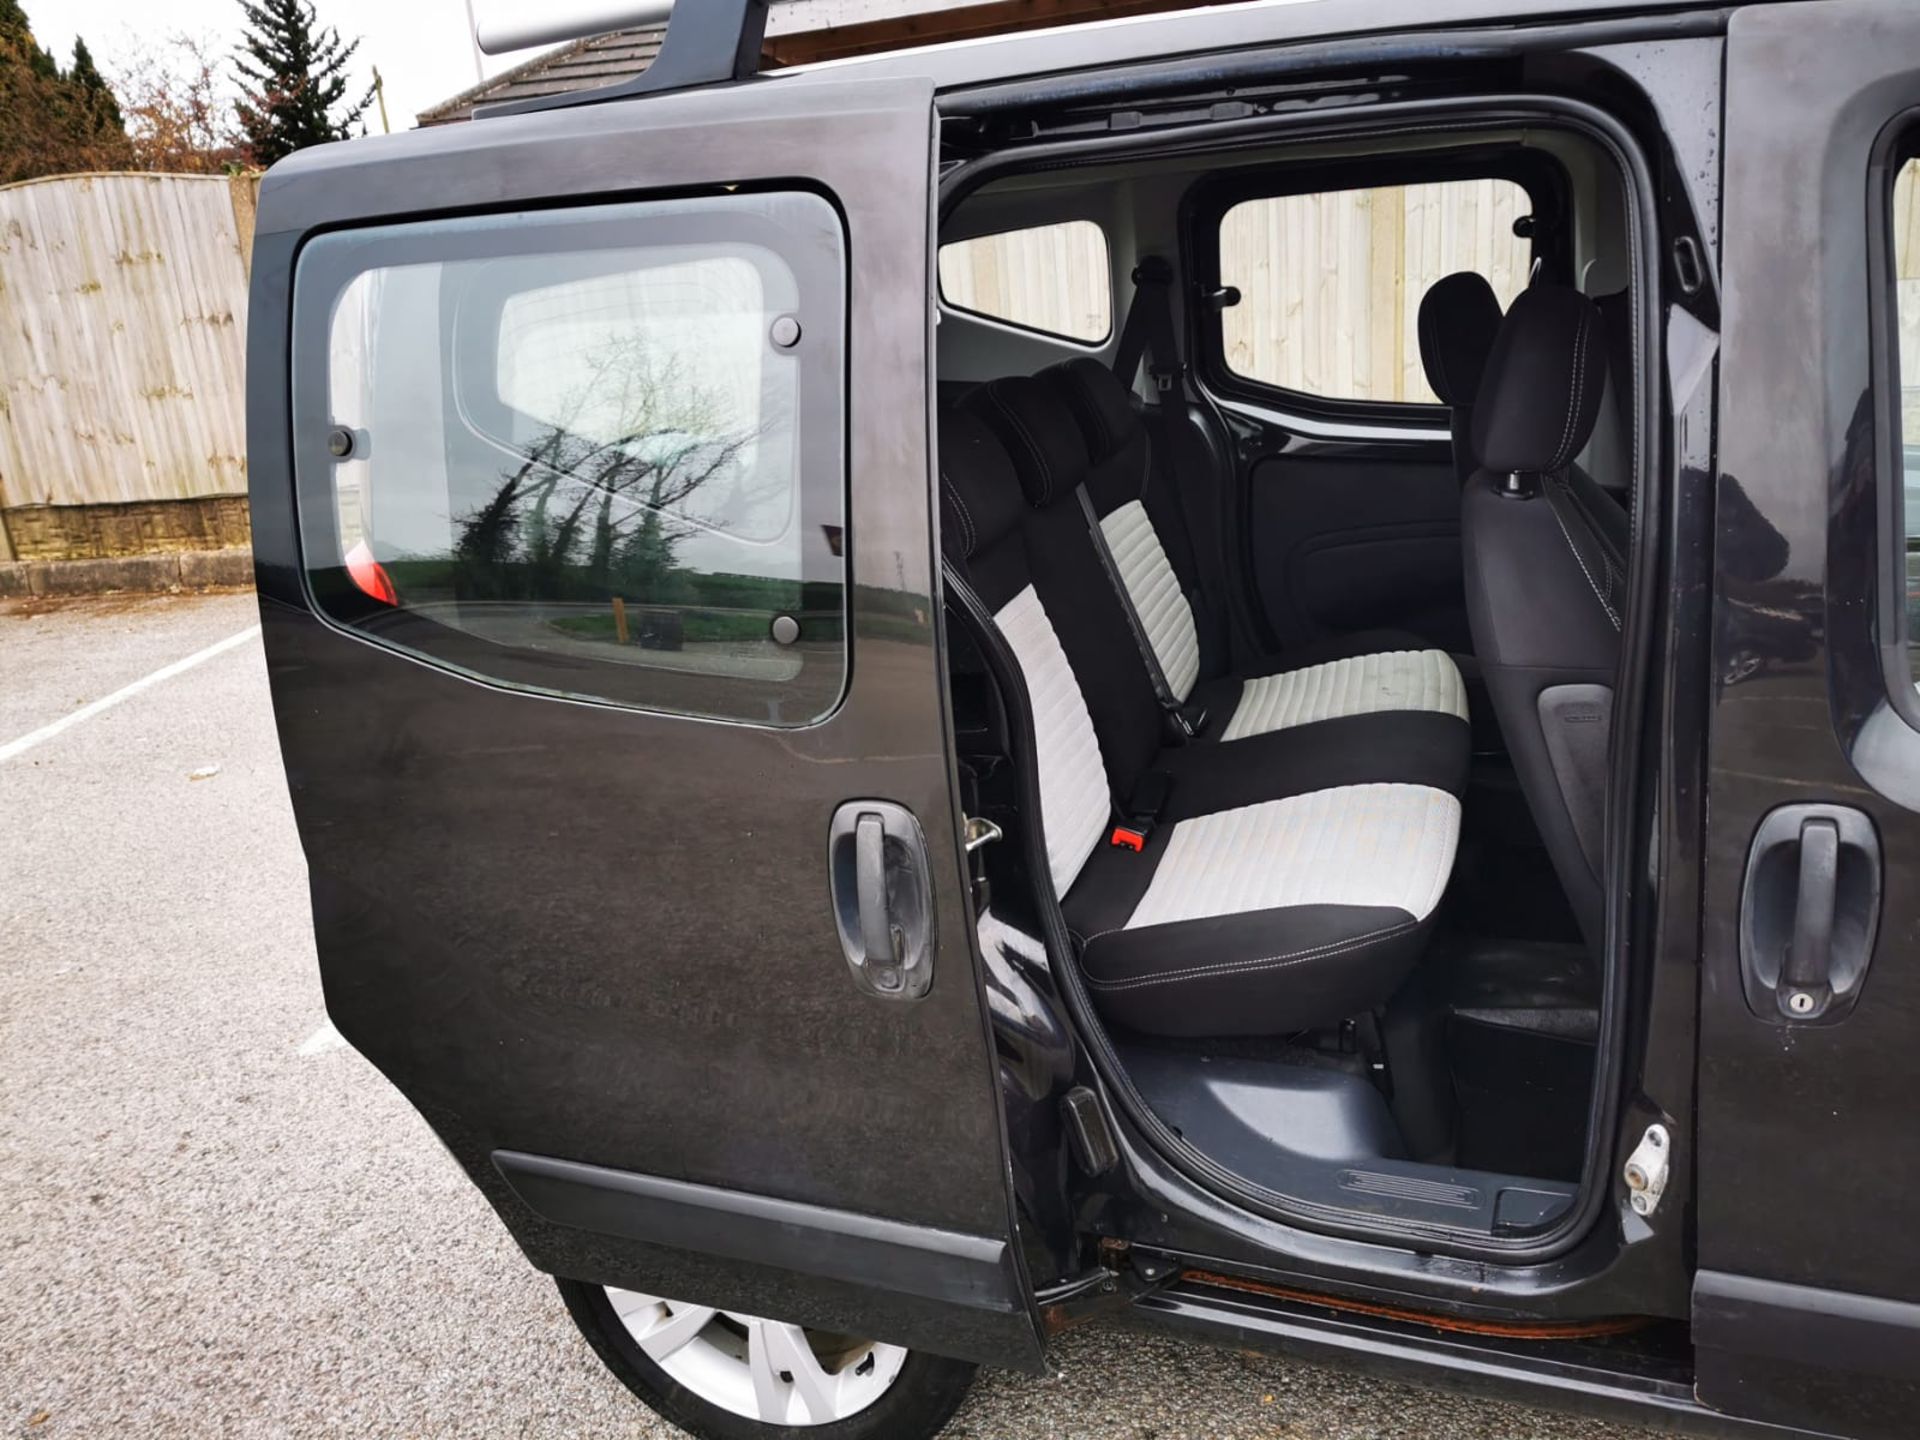 2009 FIAT QUBO DYNAMIN MULTIJET MPV, DIESEL ENGINE, SHOWING 0 PREVIOUS KEEPERS *NO VAT* - Image 10 of 27